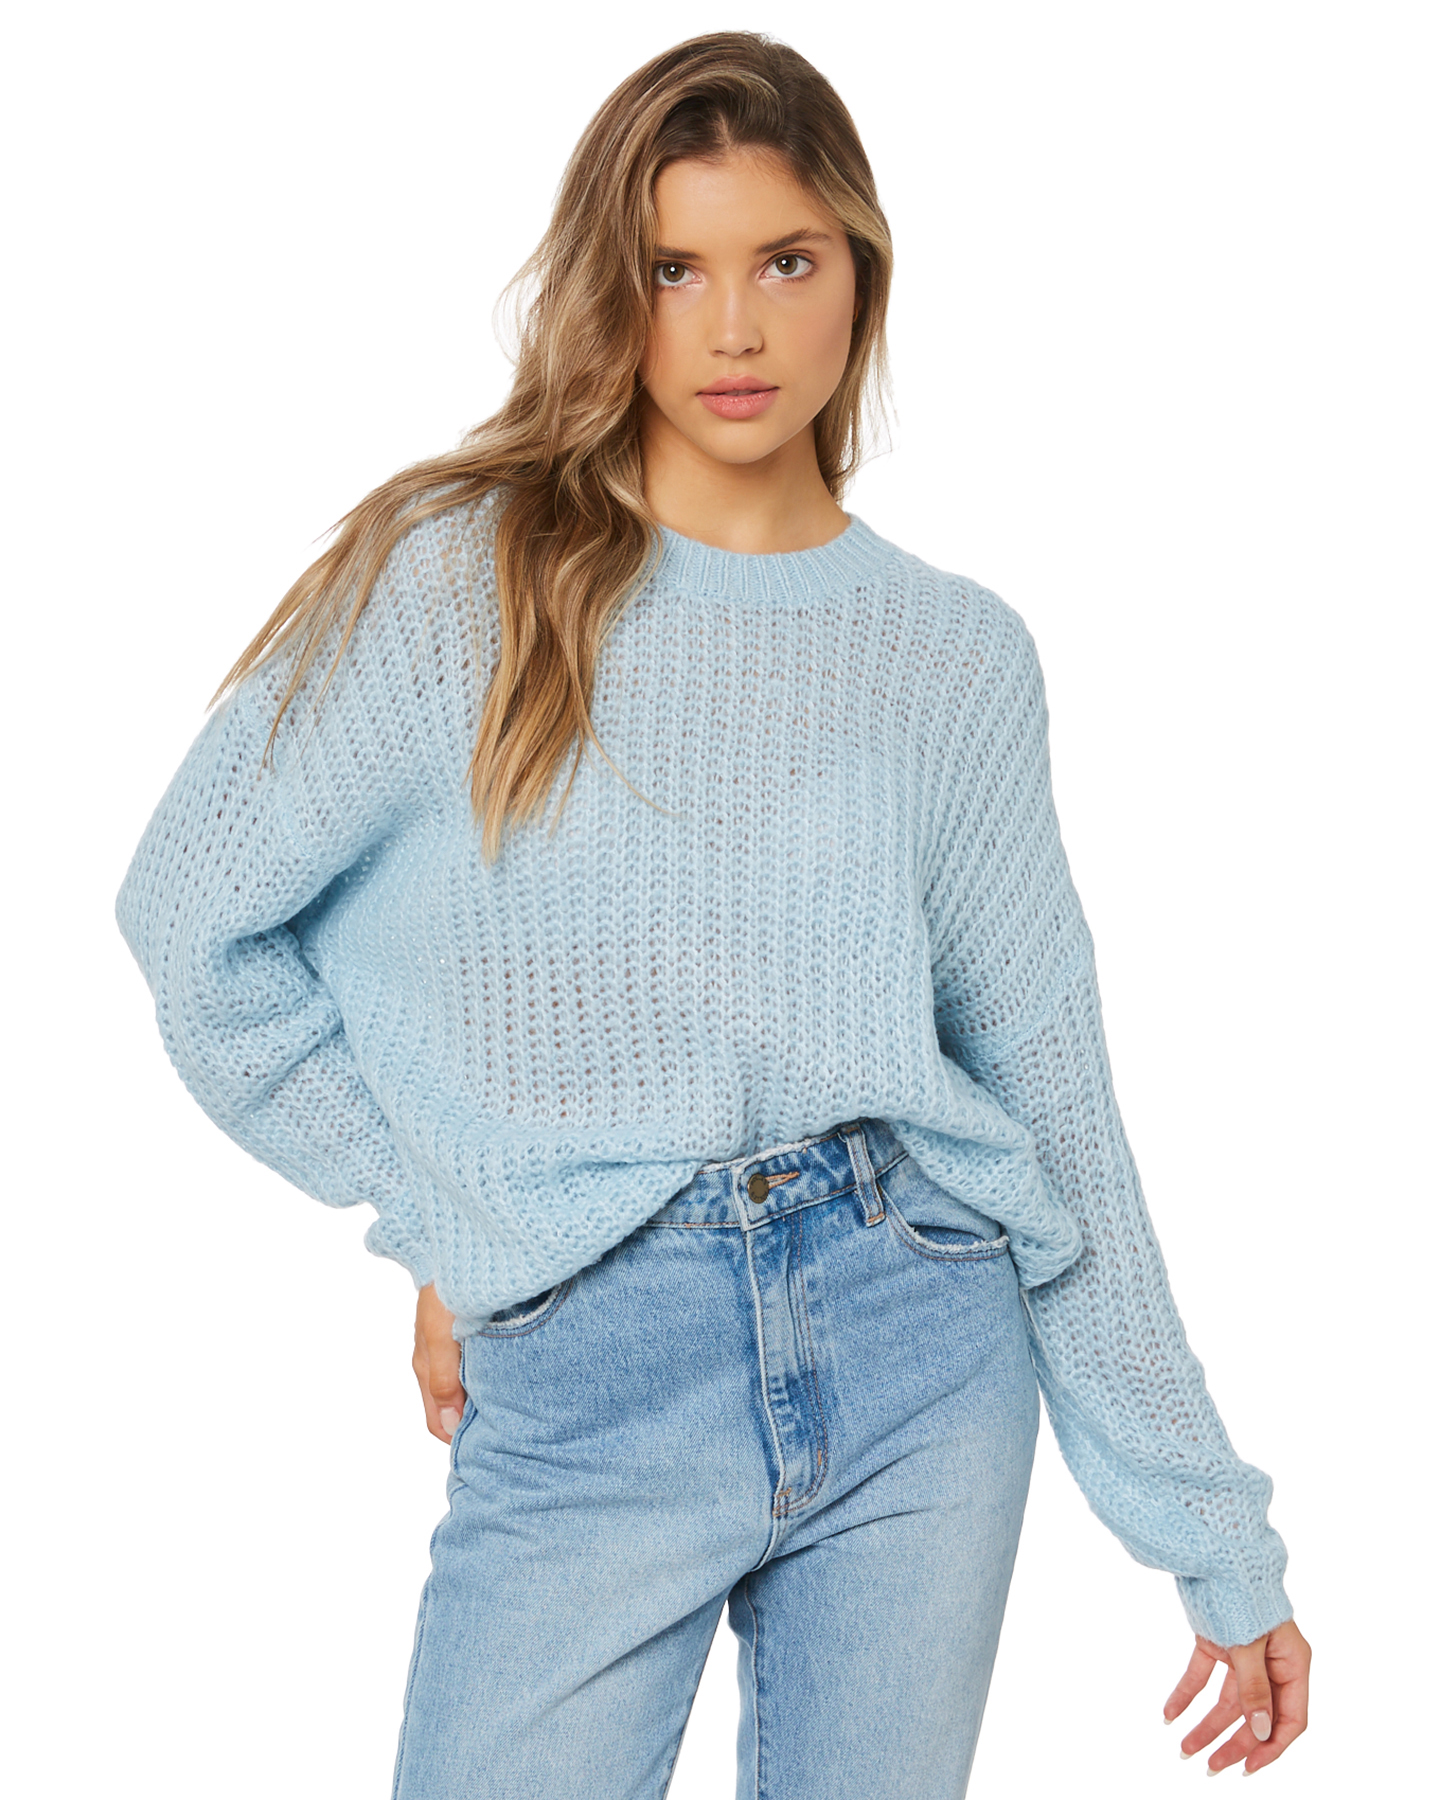 Swell Solace Knit Sweater - Soft Blue | SurfStitch